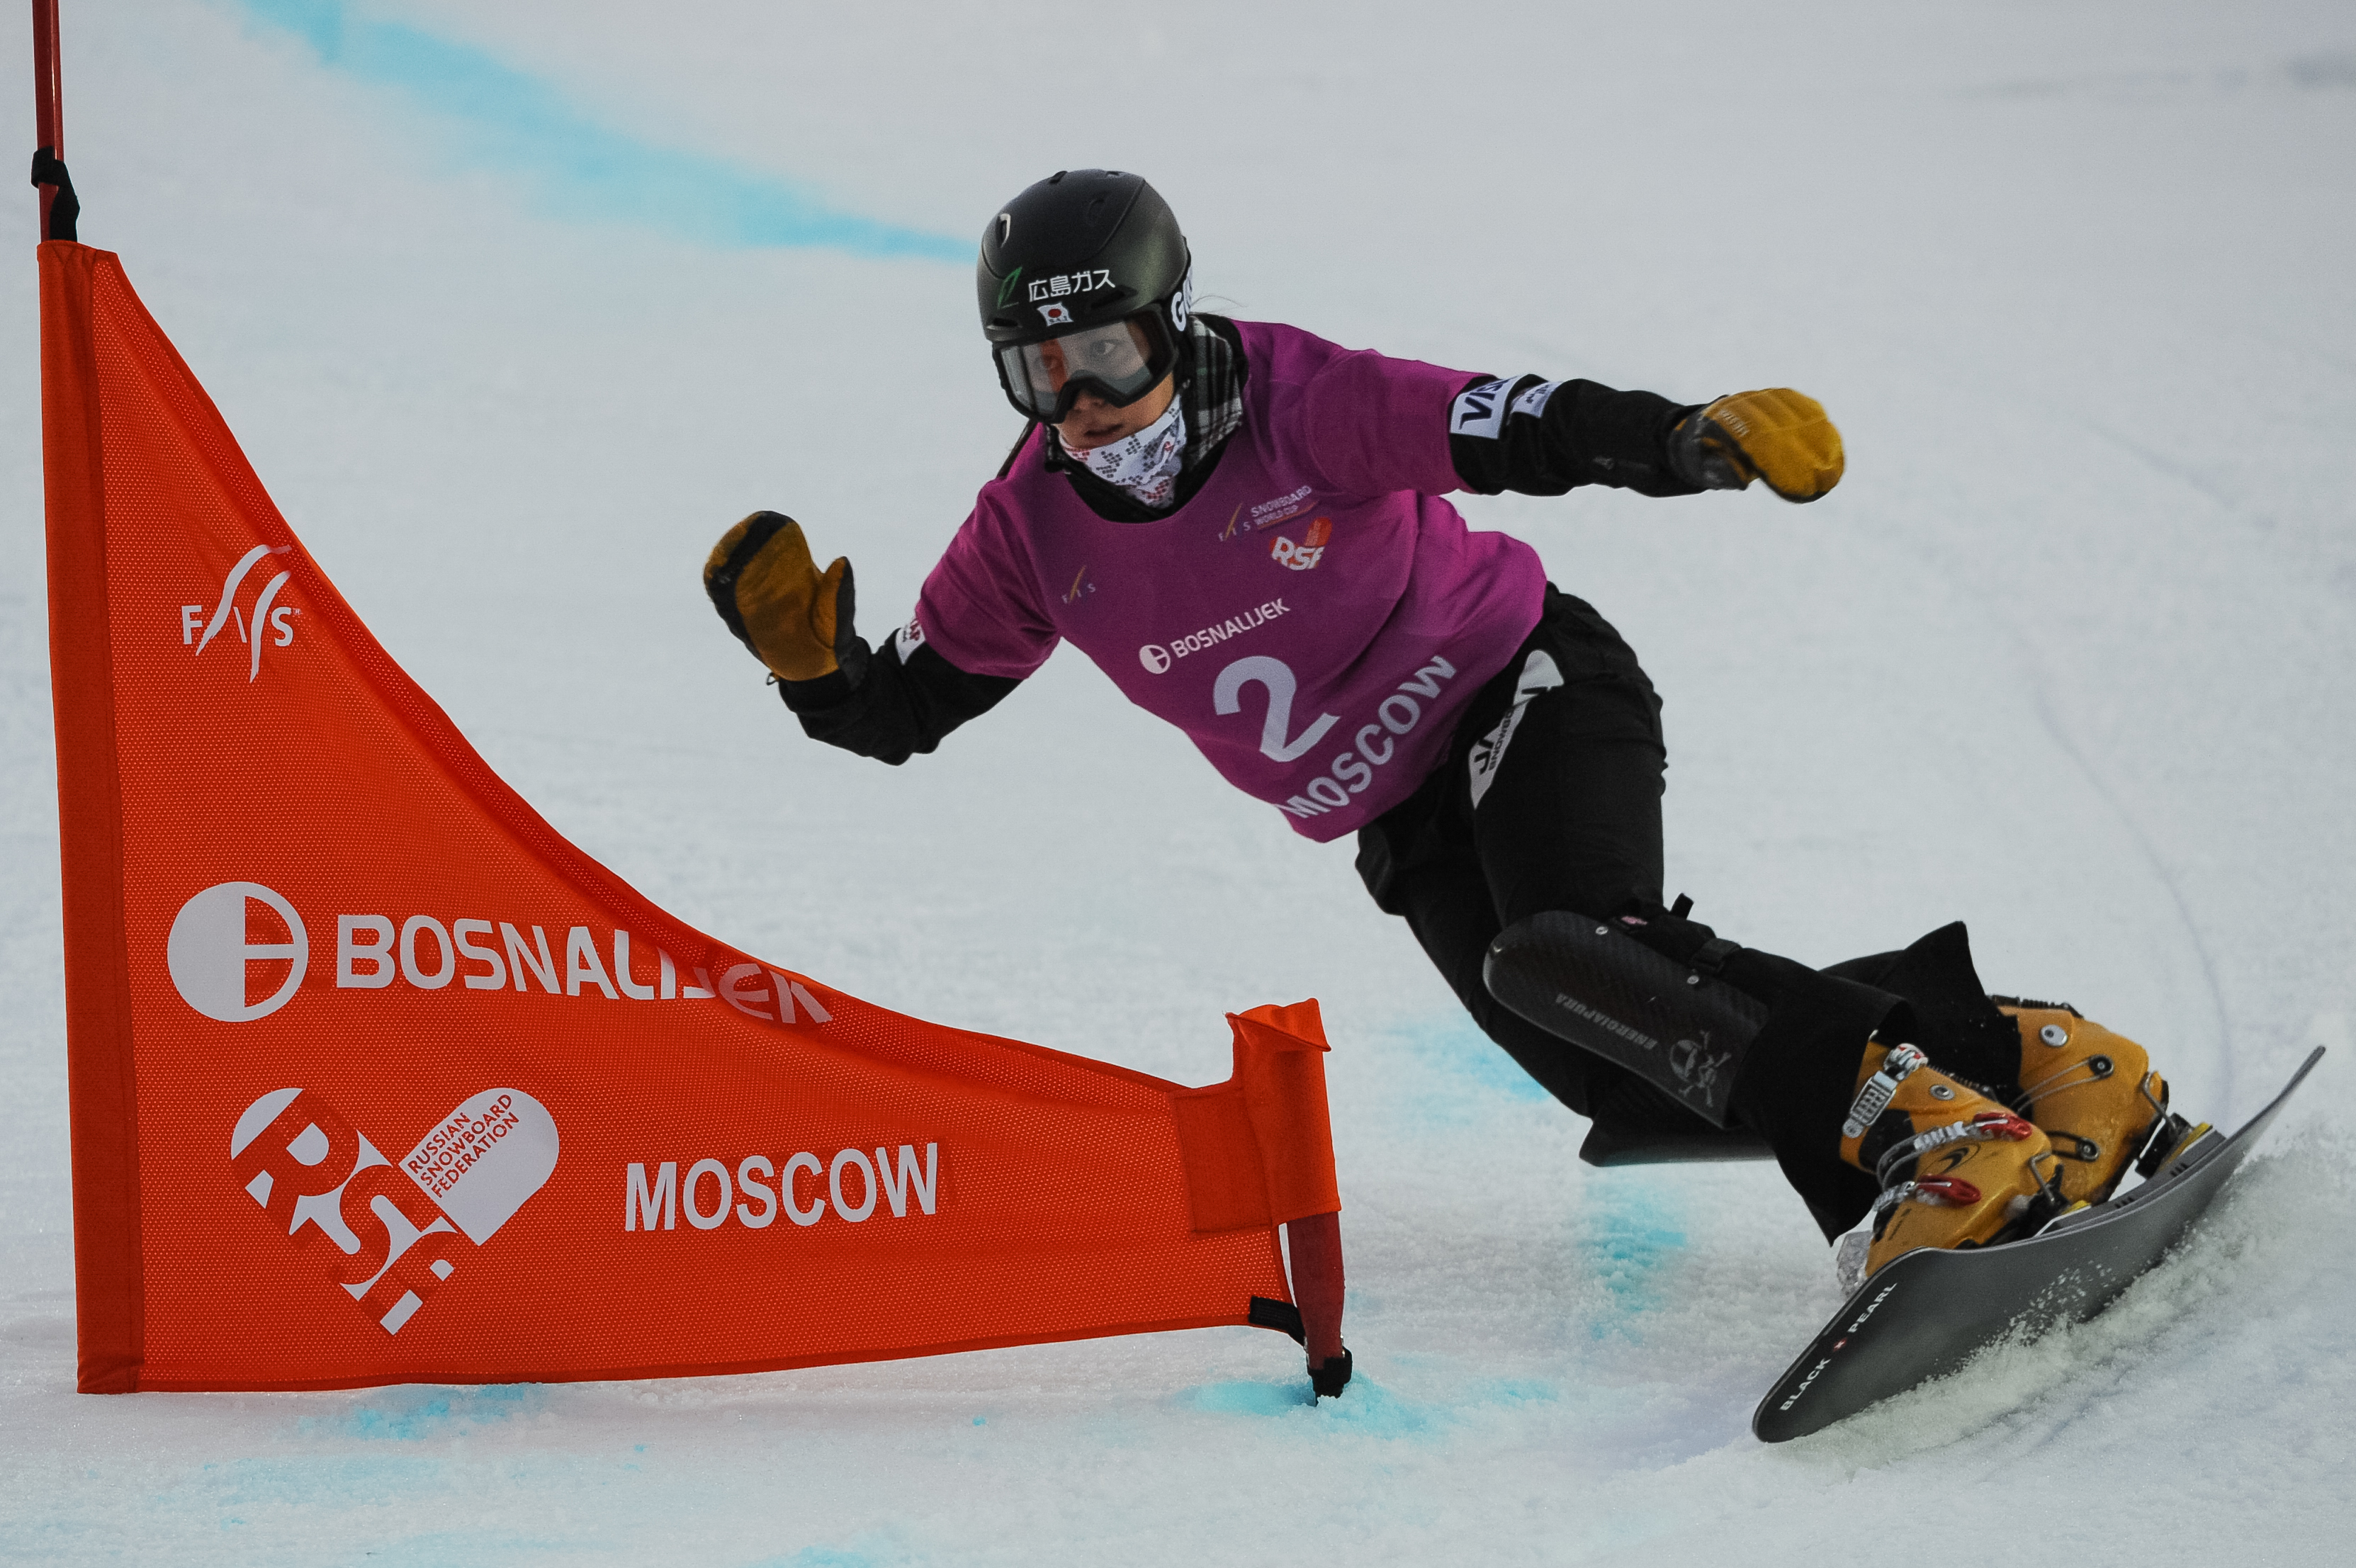 FIS Snowboard World Cup - Moscow RUS - PSL